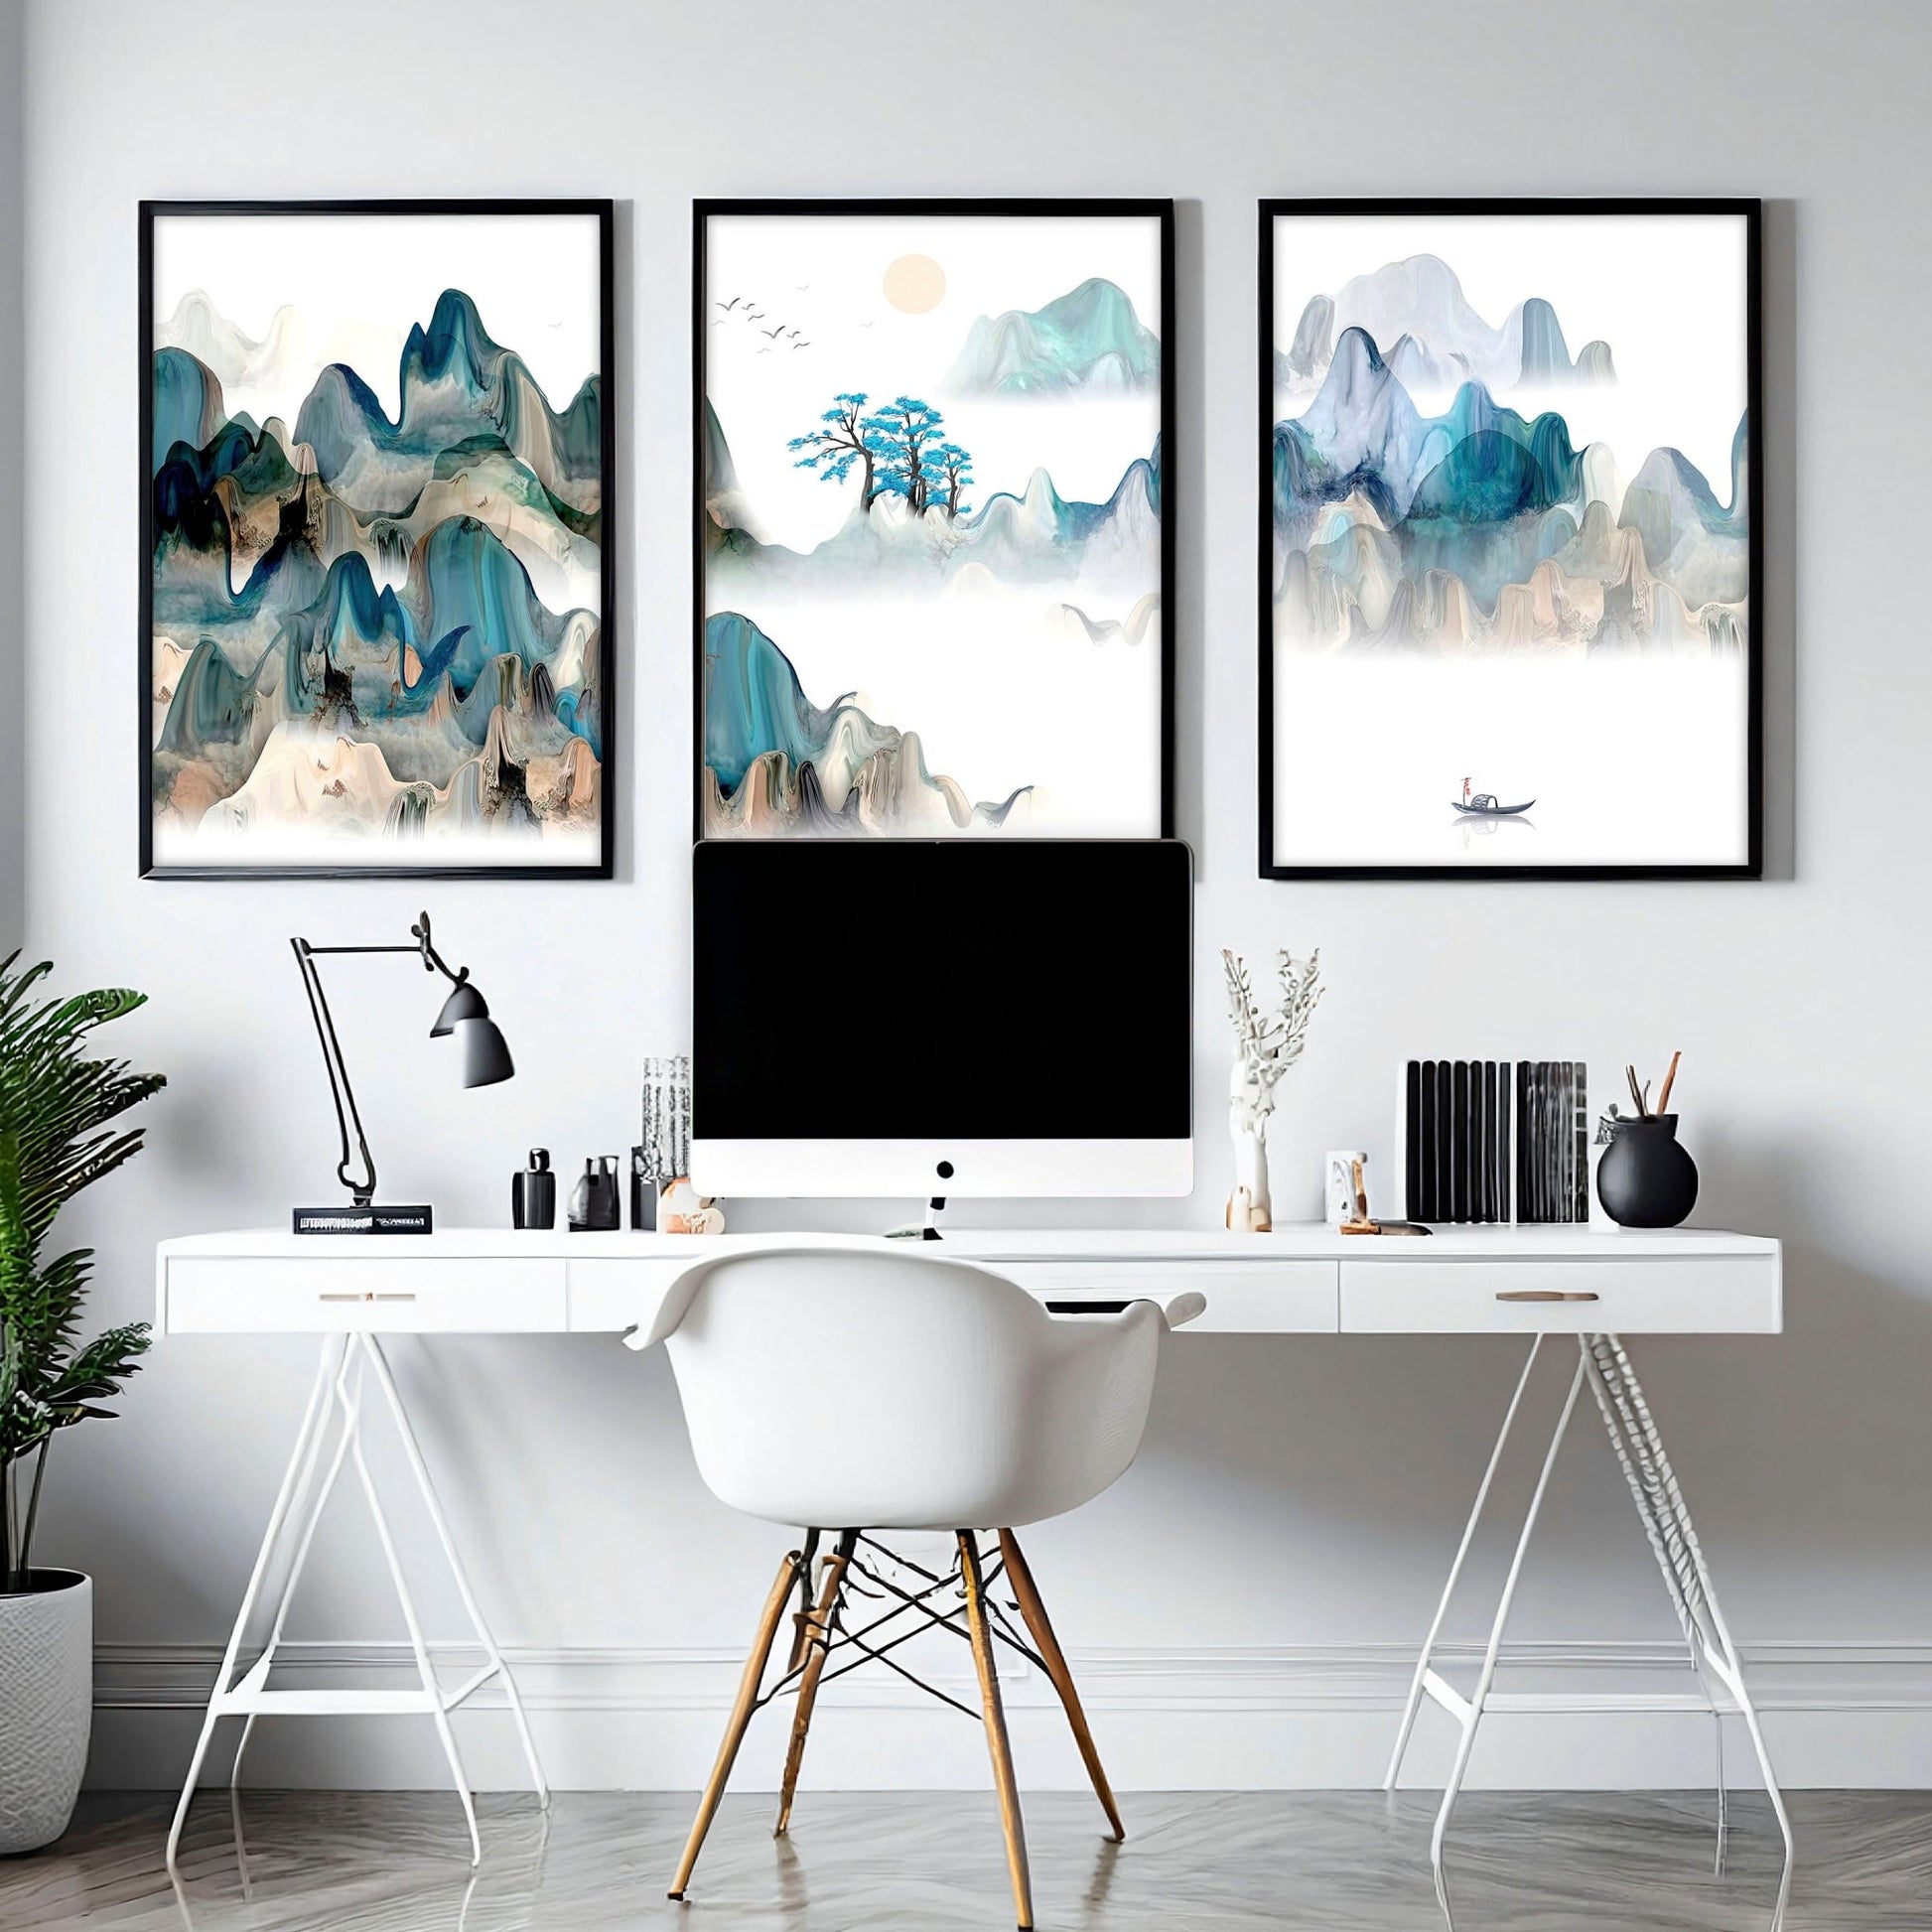 Prints for home office | set of 3 wall art prints - About Wall Art